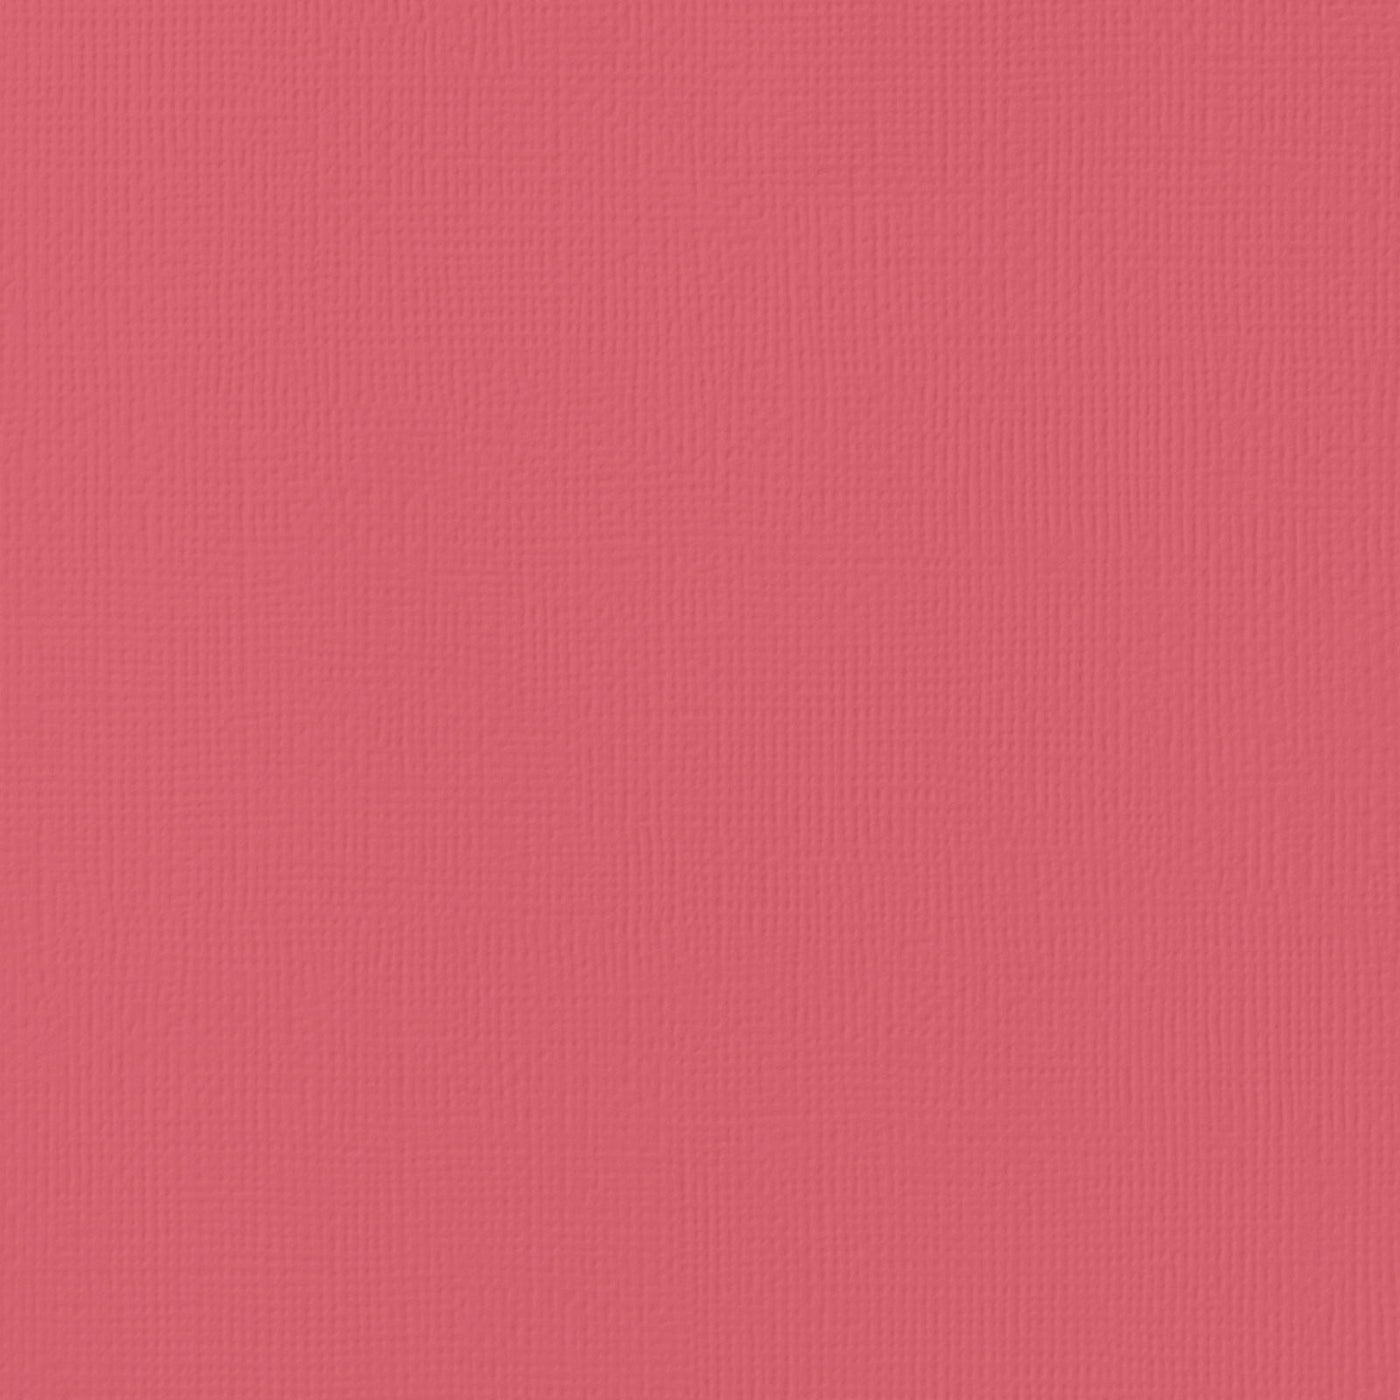 Glitter Cardstock Pink 12 x 12 81# Cover Sheets Bulk Pack of 15